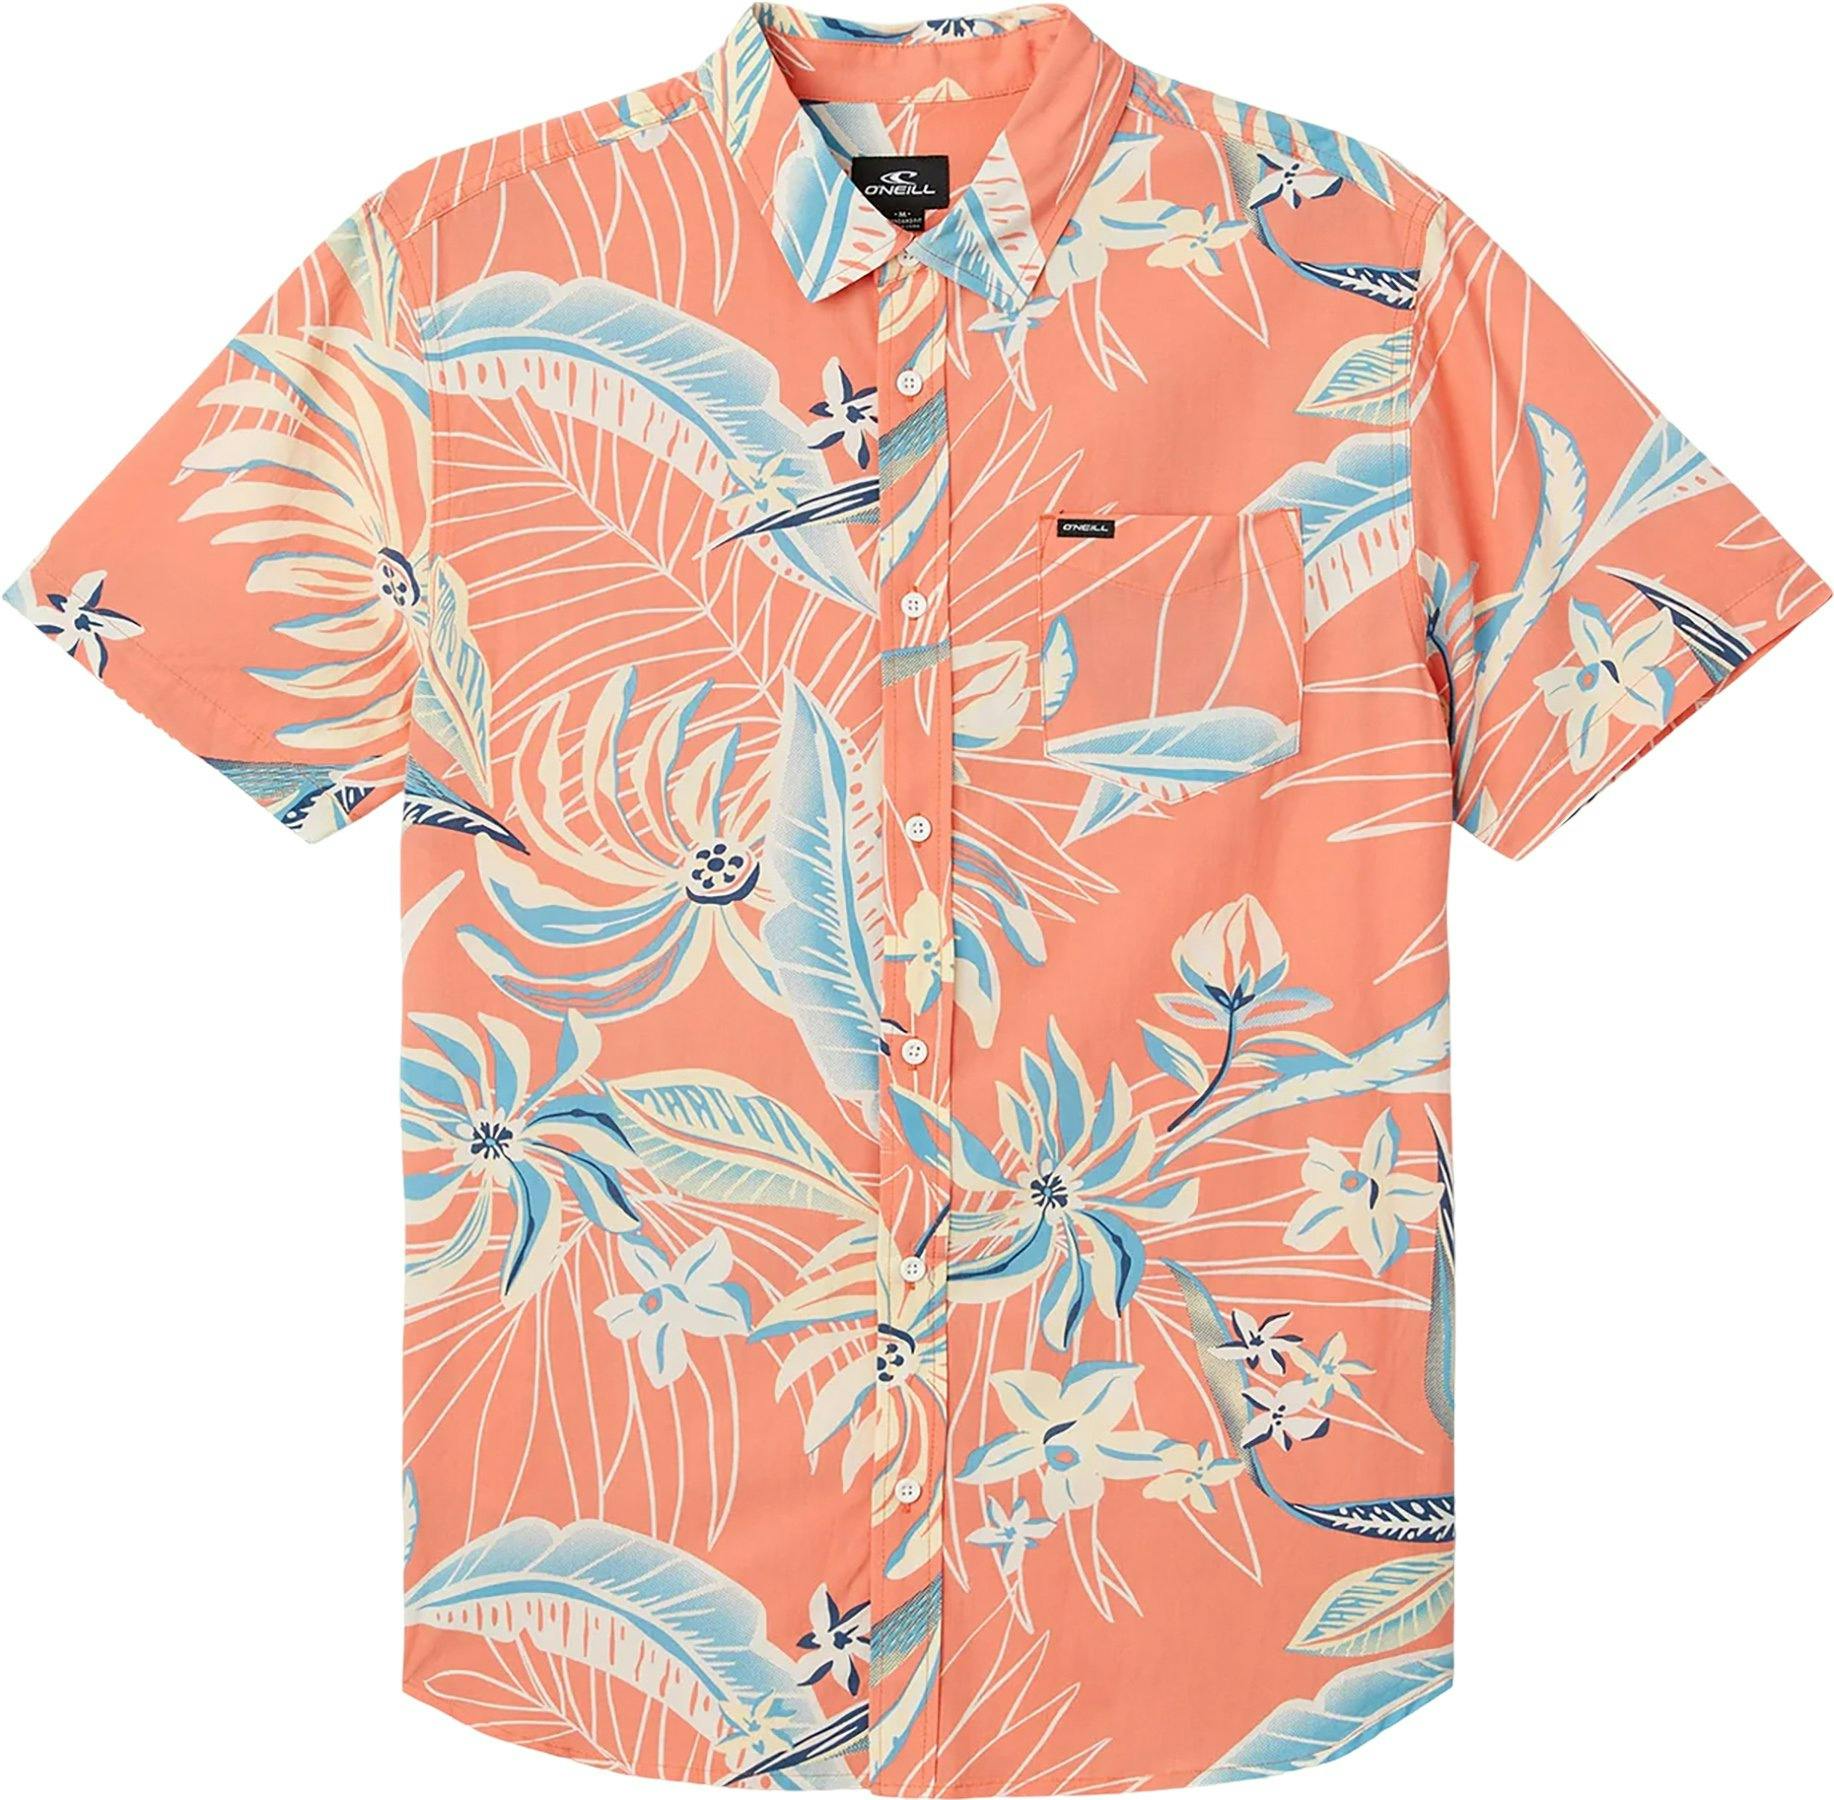 Product image for Oasis Eco Short sleeve Standard Woven Shirt - Men's